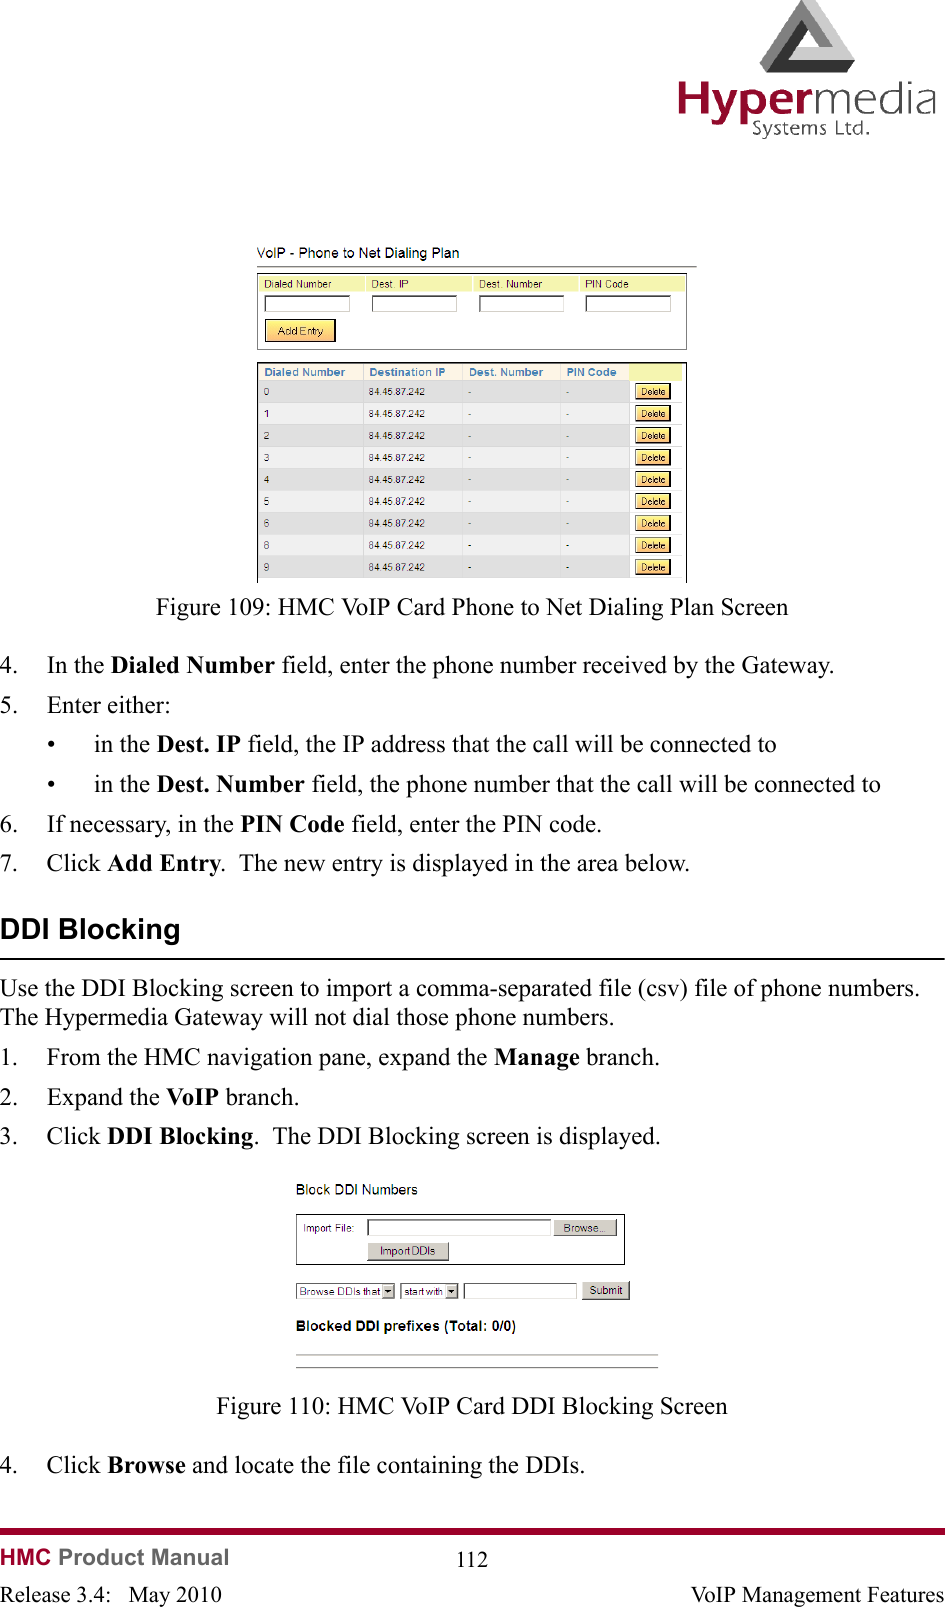   HMC Product Manual  112Release 3.4:   May 2010 VoIP Management Features              Figure 109: HMC VoIP Card Phone to Net Dialing Plan Screen4. In the Dialed Number field, enter the phone number received by the Gateway.5. Enter either:•in the Dest. IP field, the IP address that the call will be connected to•in the Dest. Number field, the phone number that the call will be connected to6. If necessary, in the PIN Code field, enter the PIN code.7. Click Add Entry.  The new entry is displayed in the area below.DDI BlockingUse the DDI Blocking screen to import a comma-separated file (csv) file of phone numbers.  The Hypermedia Gateway will not dial those phone numbers.1. From the HMC navigation pane, expand the Manage branch.2. Expand the VoIP  branch.3. Click DDI Blocking.  The DDI Blocking screen is displayed.              Figure 110: HMC VoIP Card DDI Blocking Screen4. Click Browse and locate the file containing the DDIs.